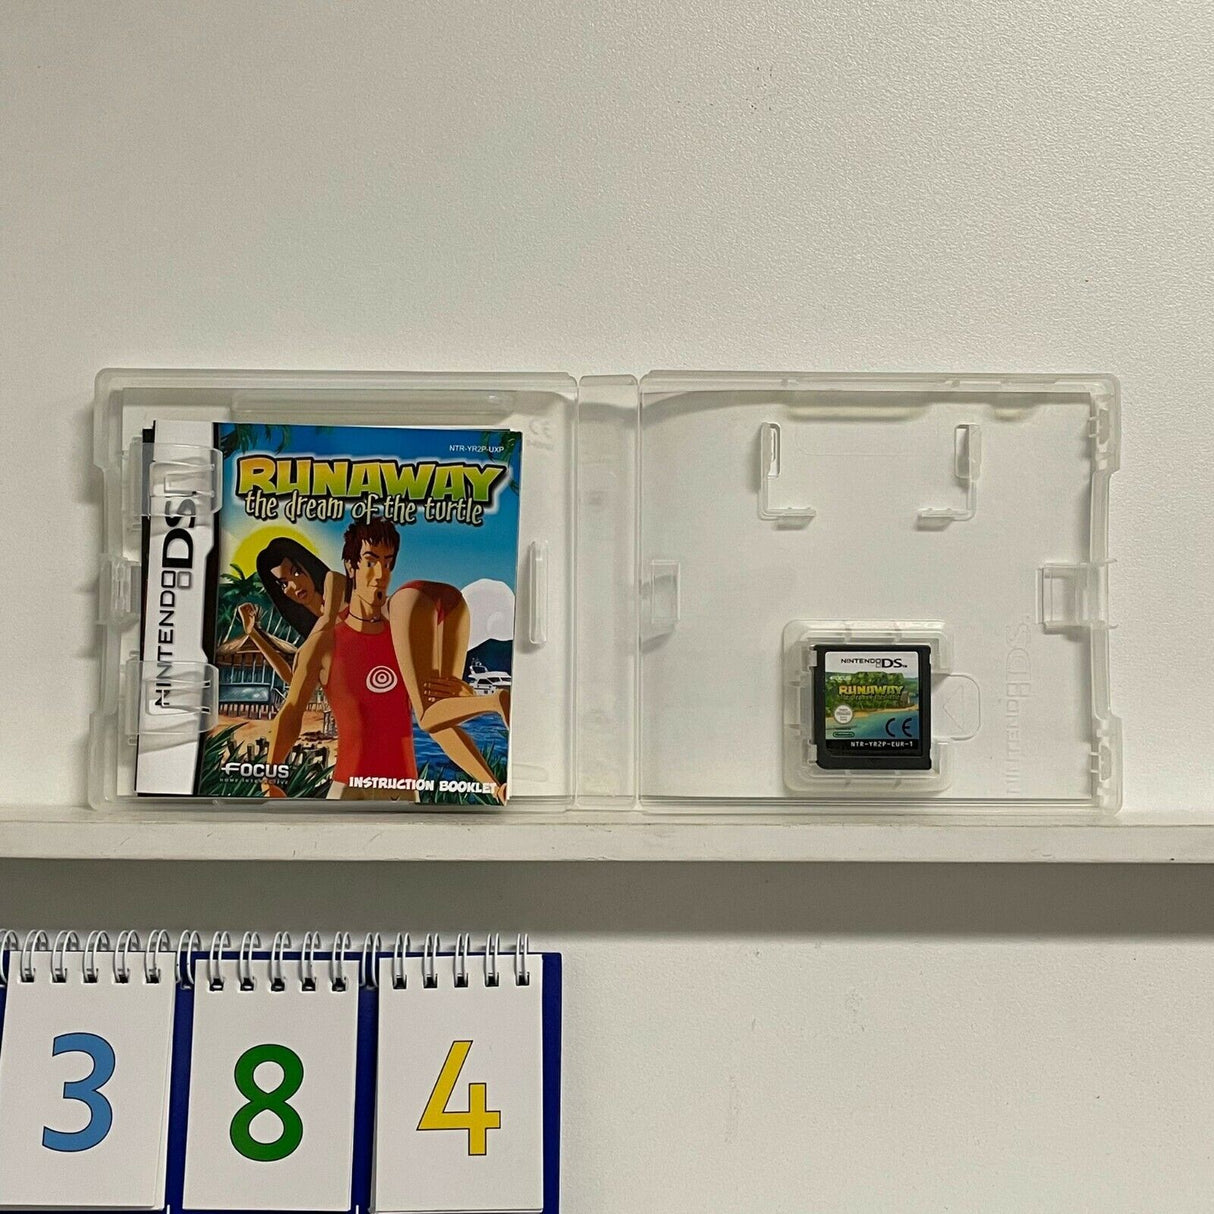 Runaway The Dream of the Turtle Nintendo DS game + Manual